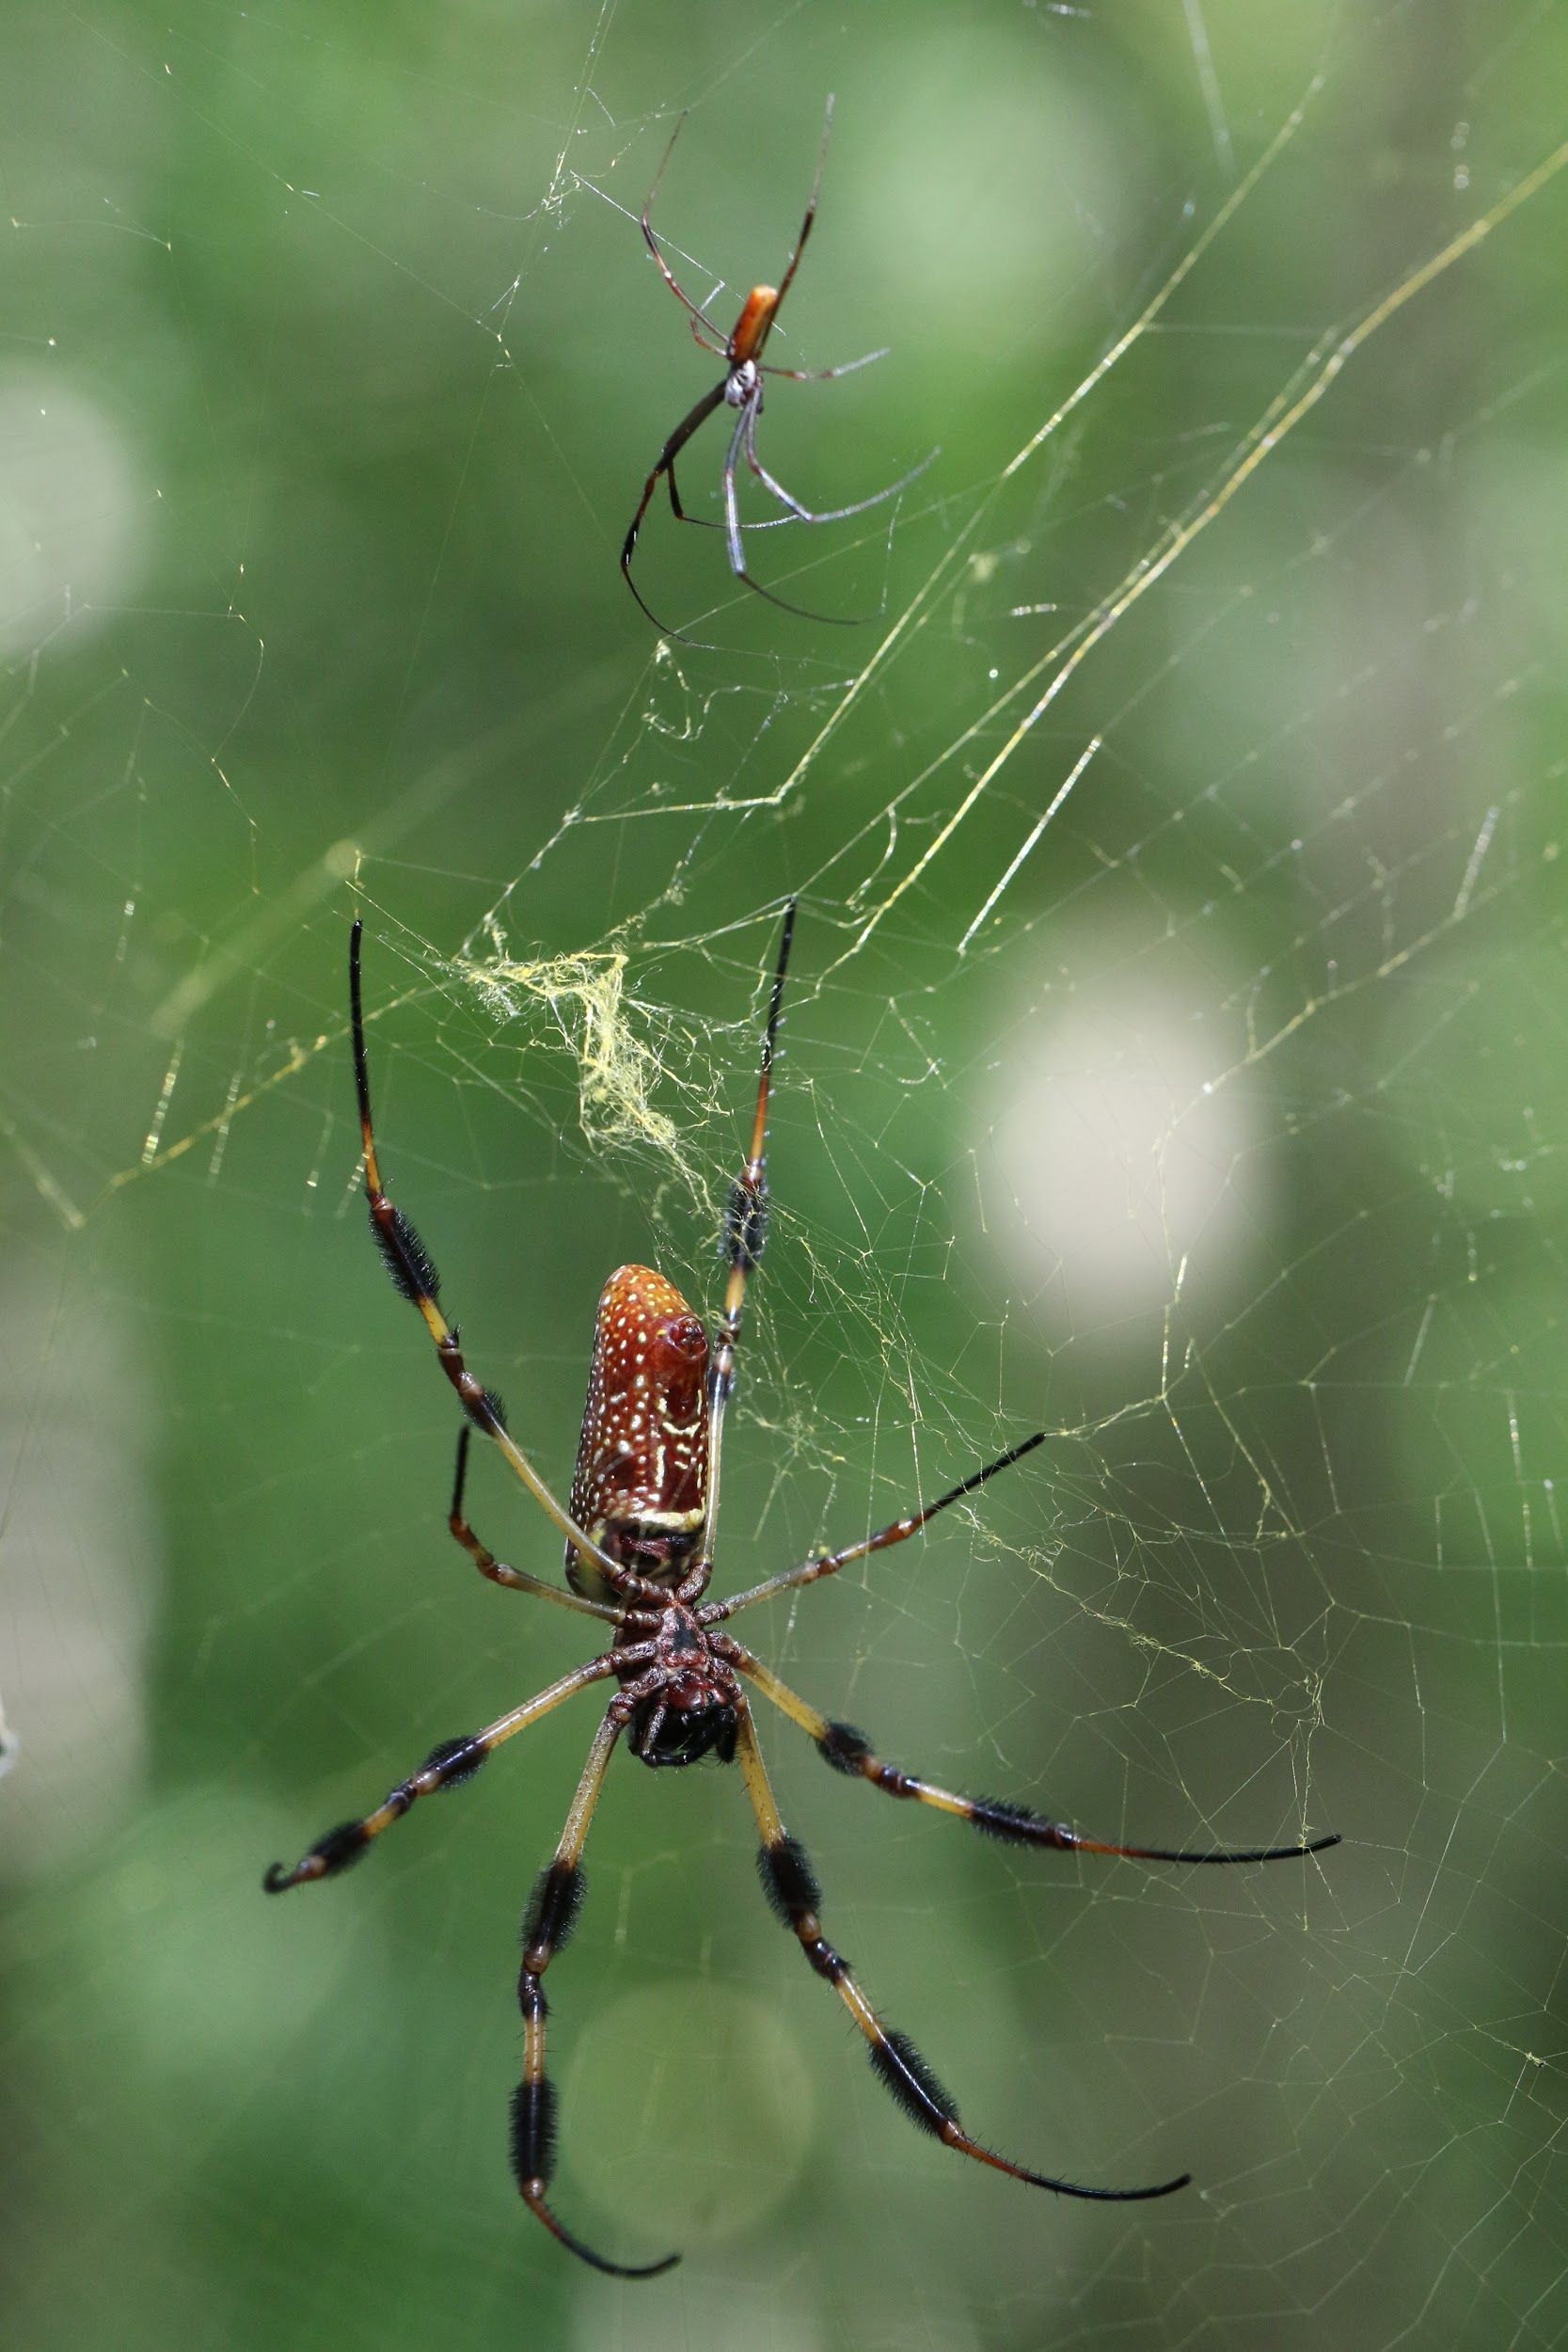 A pair of golden silk orb weavers (Trichonephila clavipes). The tiny adult male rests above the large adult female. Note the golden hue of the silk. 